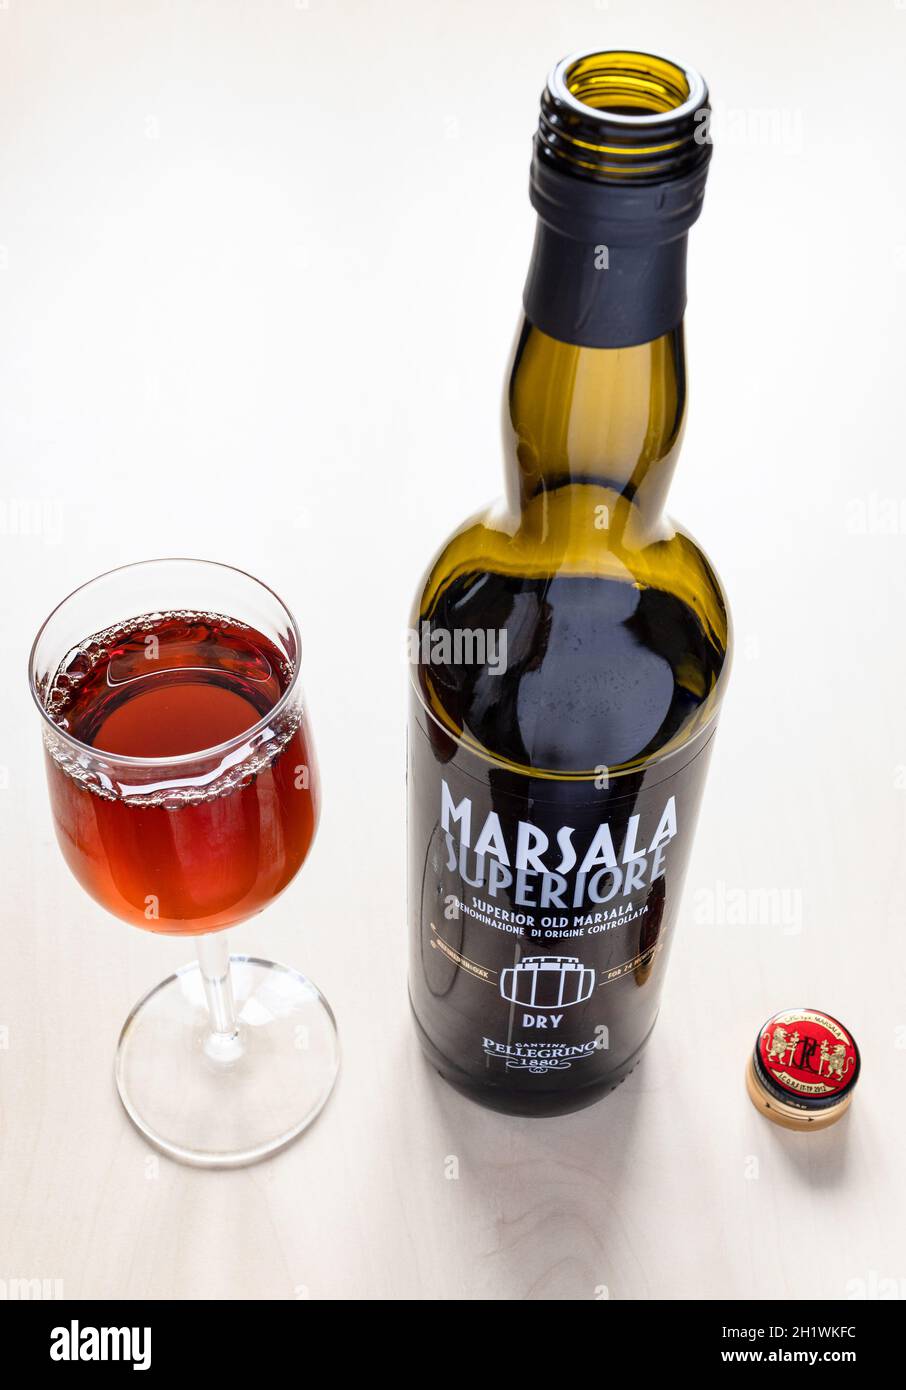 MOSCOW, RUSSIA - JUNE 10, 2021: open bottle of dry superior Marsala from Cantine Pellegrino. Marsala is fortified wine, produced in the region surroun Stock Photo